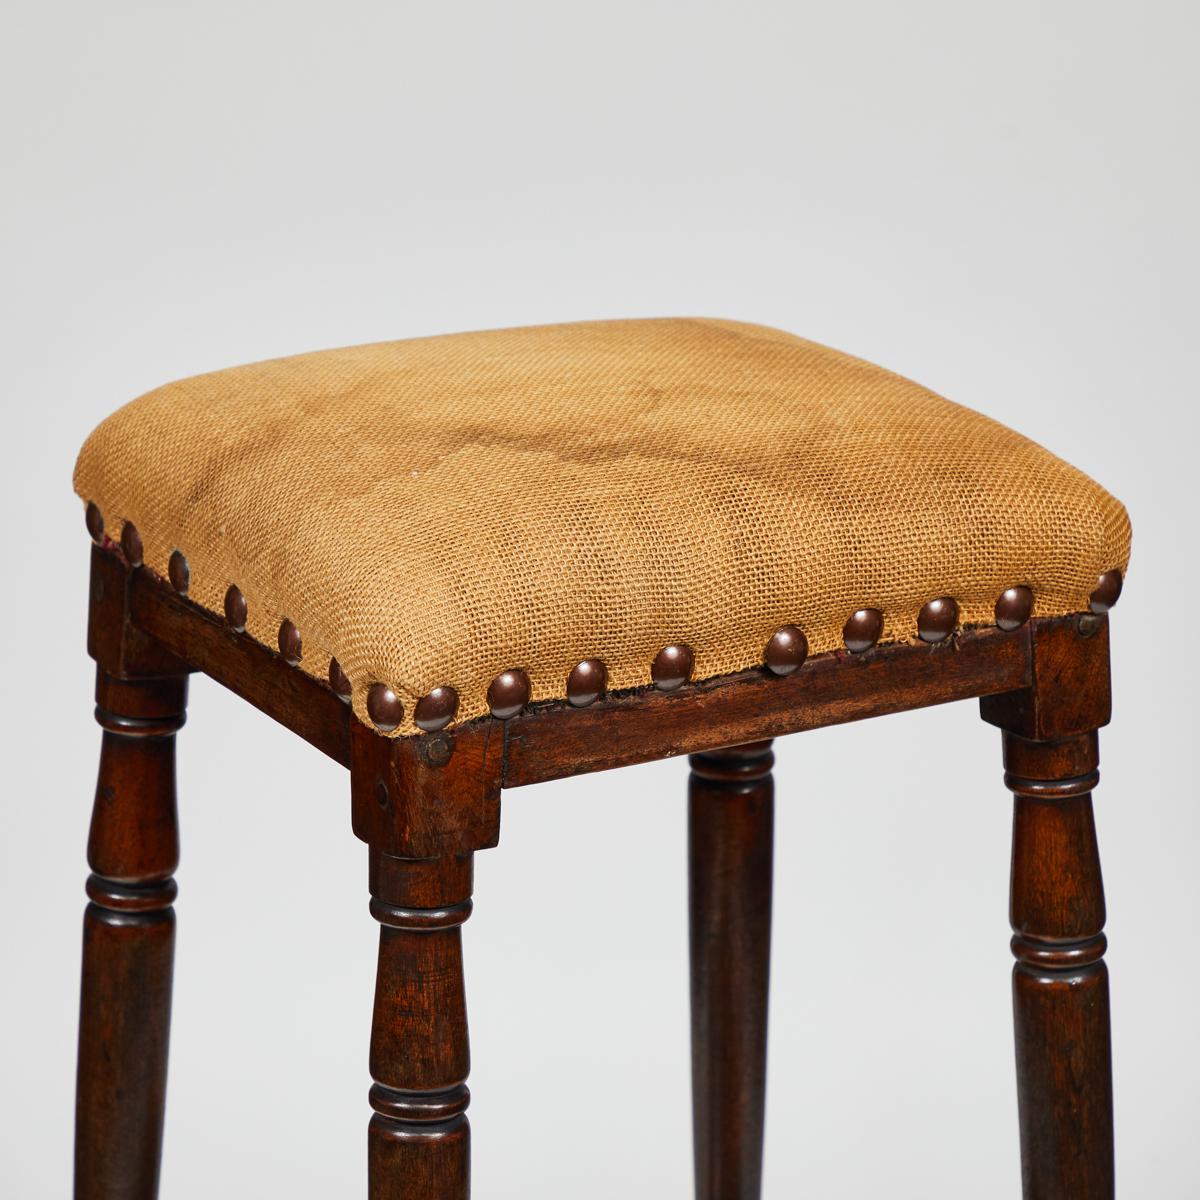 Late 19th Century Tall Upholstered English Stool with Bottom Shelf For Sale 1